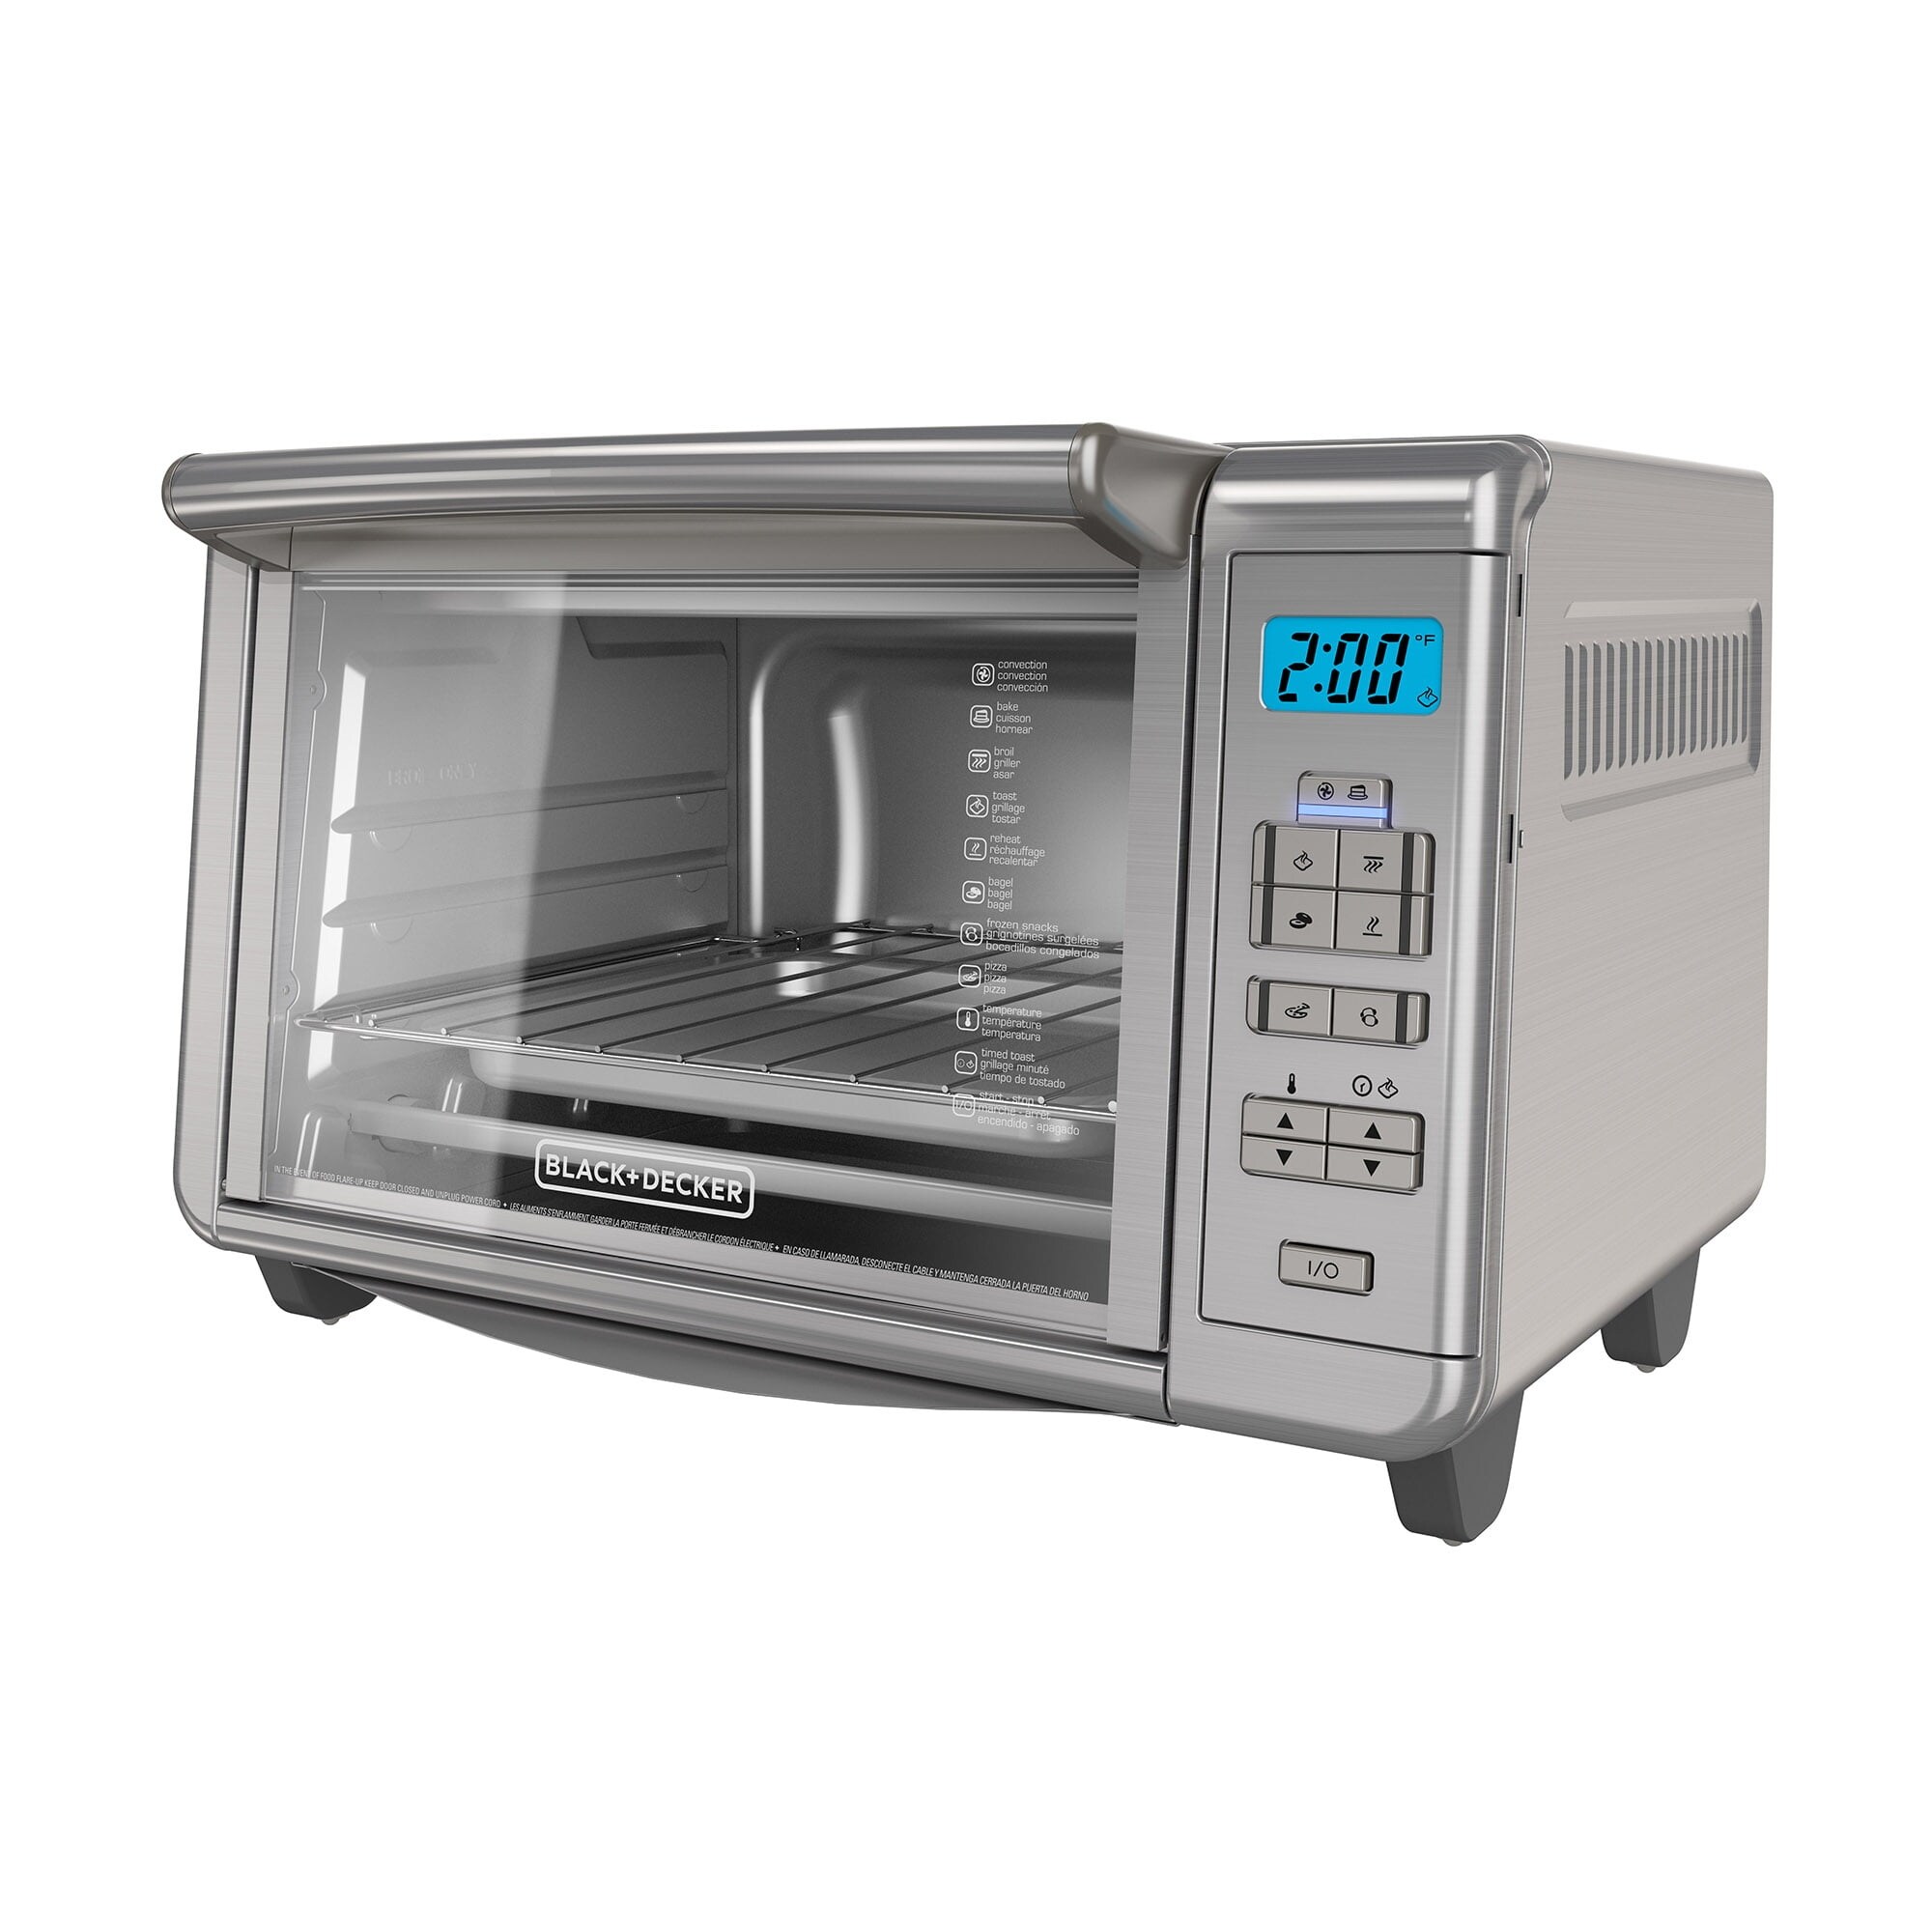 https://ak1.ostkcdn.com/images/products/is/images/direct/0b168e62db580b538e394079b8a118b3bfdfe9a8/6-Slice-Digital-Convection-Toaster-Oven%2C-Stainless-Steel%2C-TO3280SSD.jpg